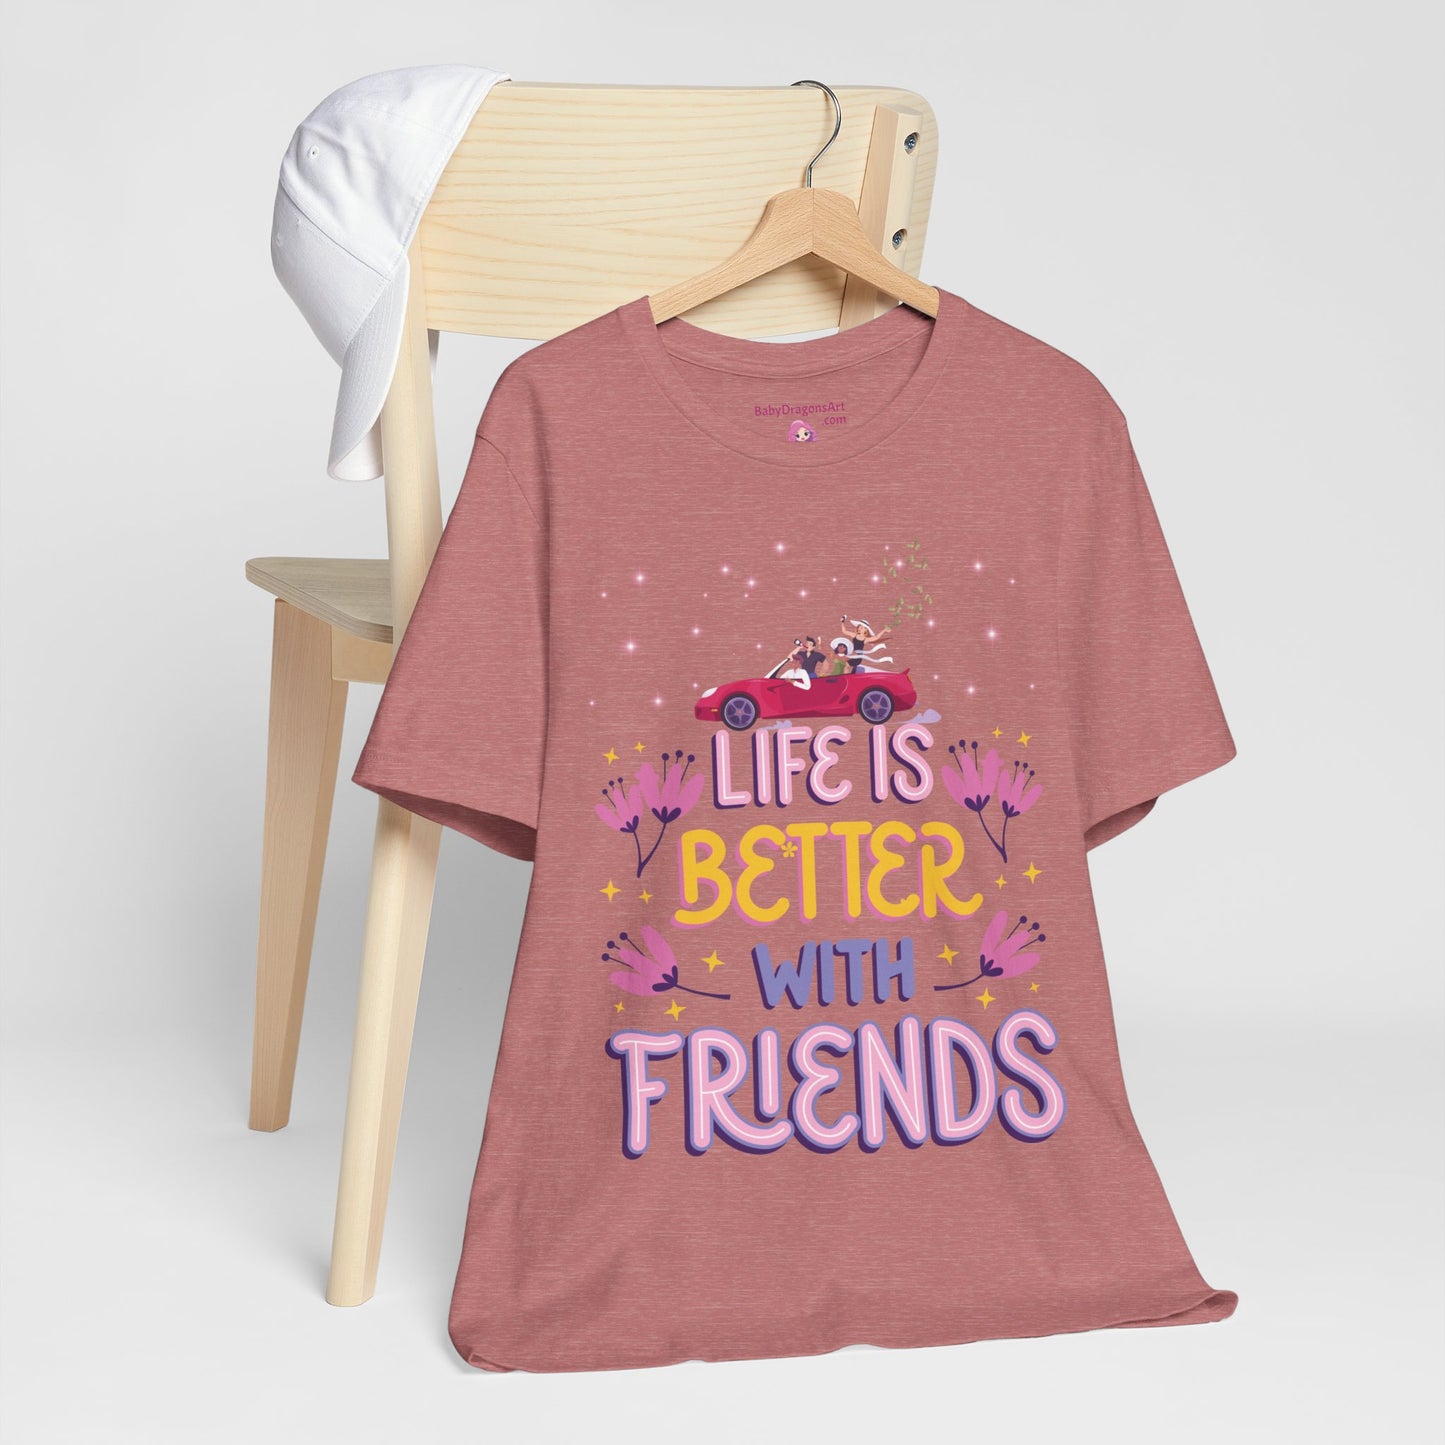 Life IS Better With Friends With Cash Jersey Short Sleeve Tee - Perfect Gift - Friends With Cash